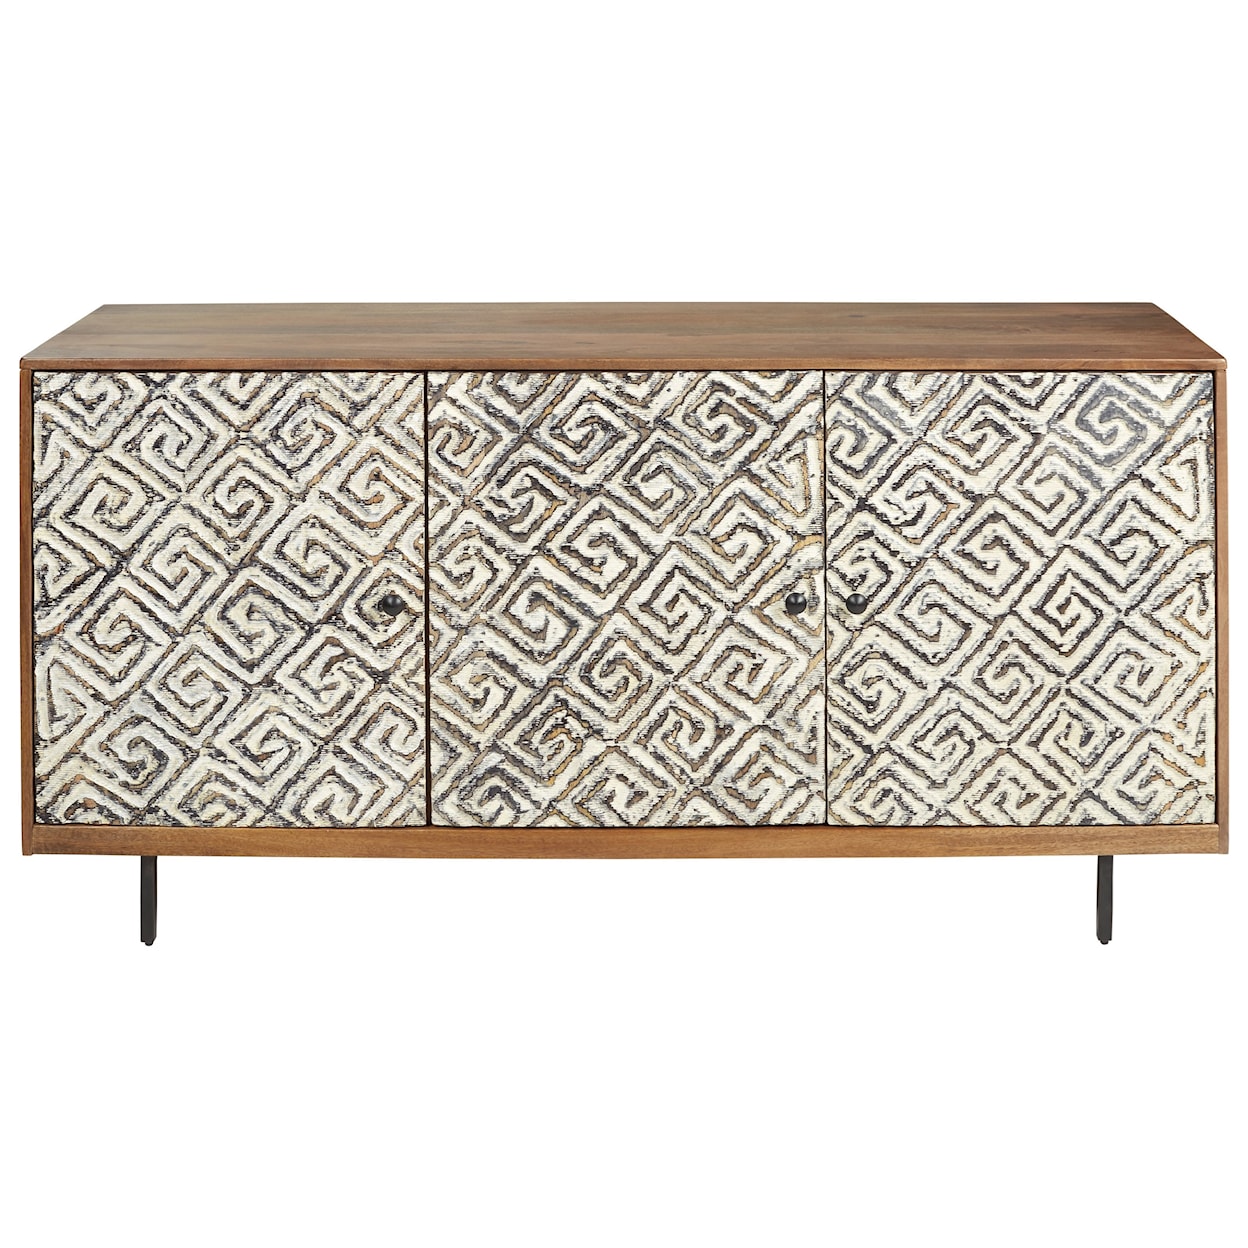 Signature Design by Ashley Kerrings Accent Cabinet